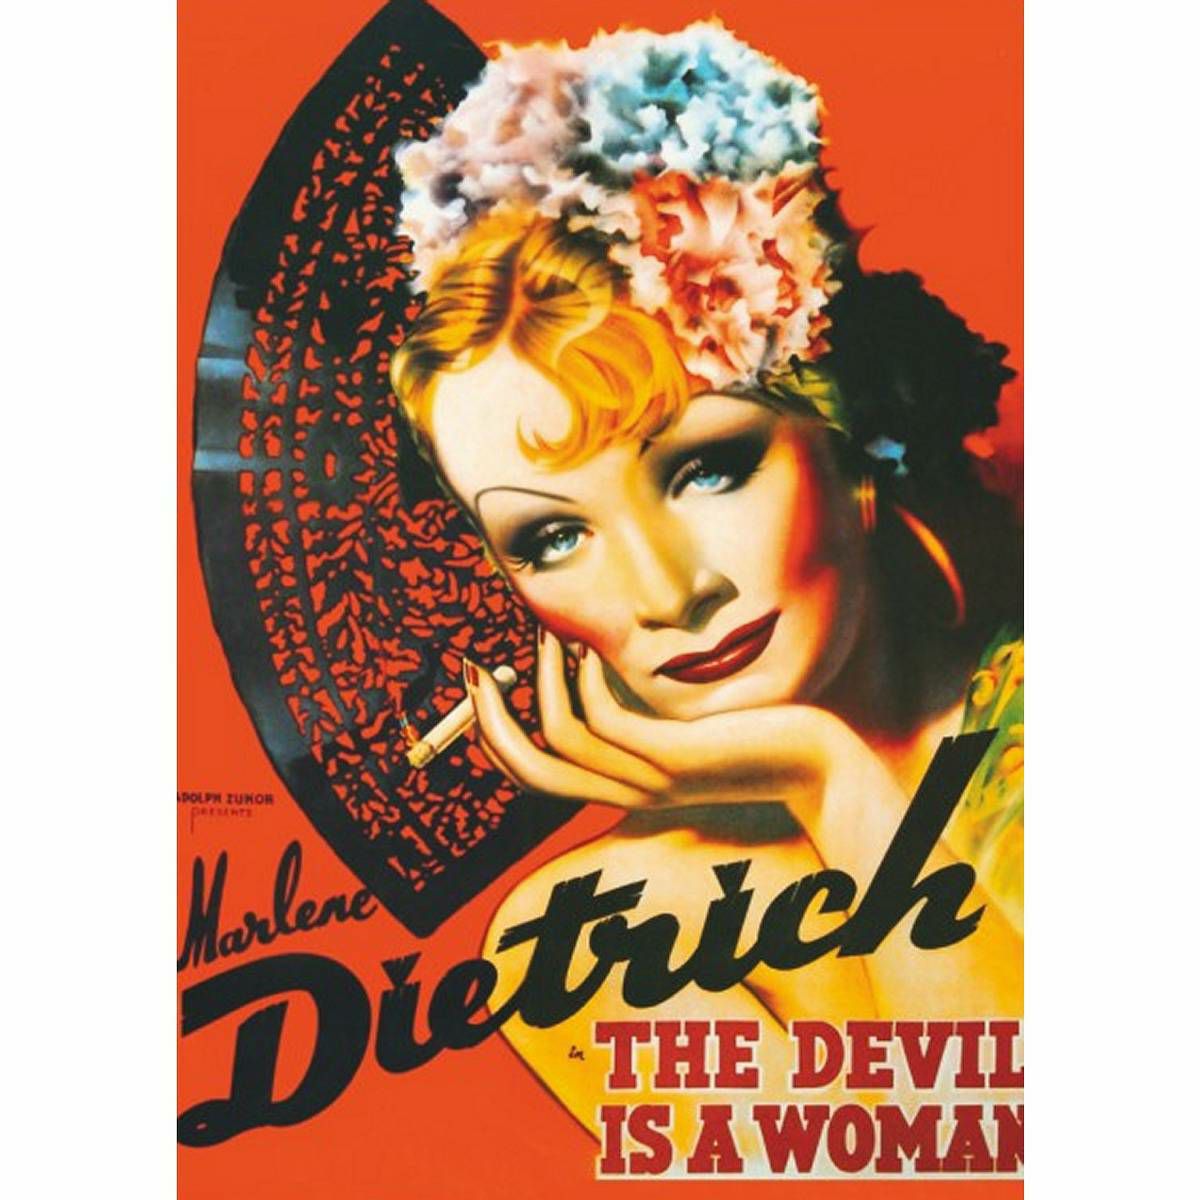 Puzzle Marlene Dietrich The Devil is a Woman